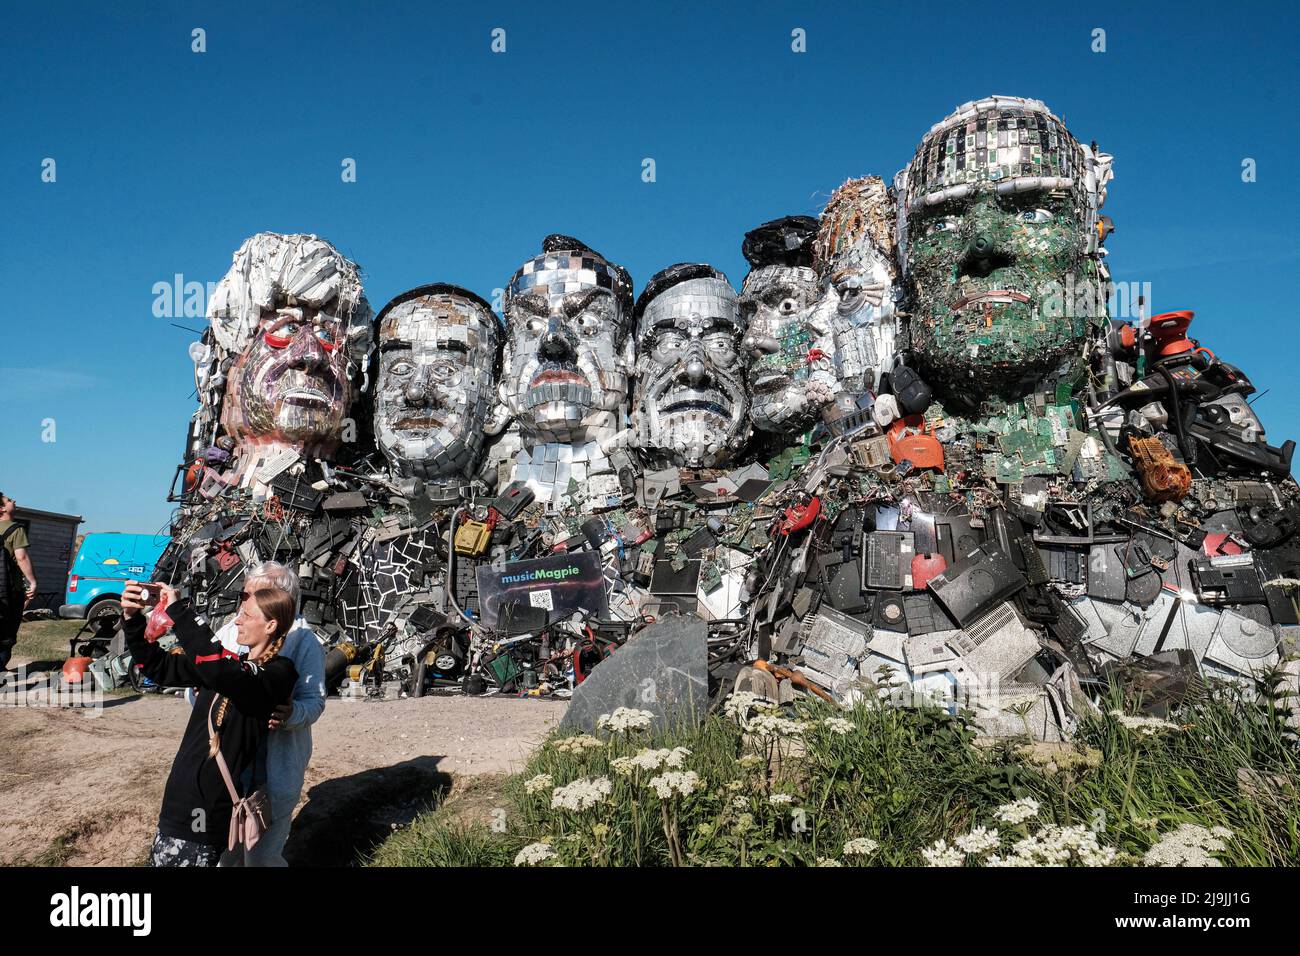 In St Ives, Cornwall, during the G7 summit a giant installation resembling the leaders of the 7 Nations, using electronic waste has been created to bring attention to the environmental impact of the disposal of electronic devices. Stock Photo